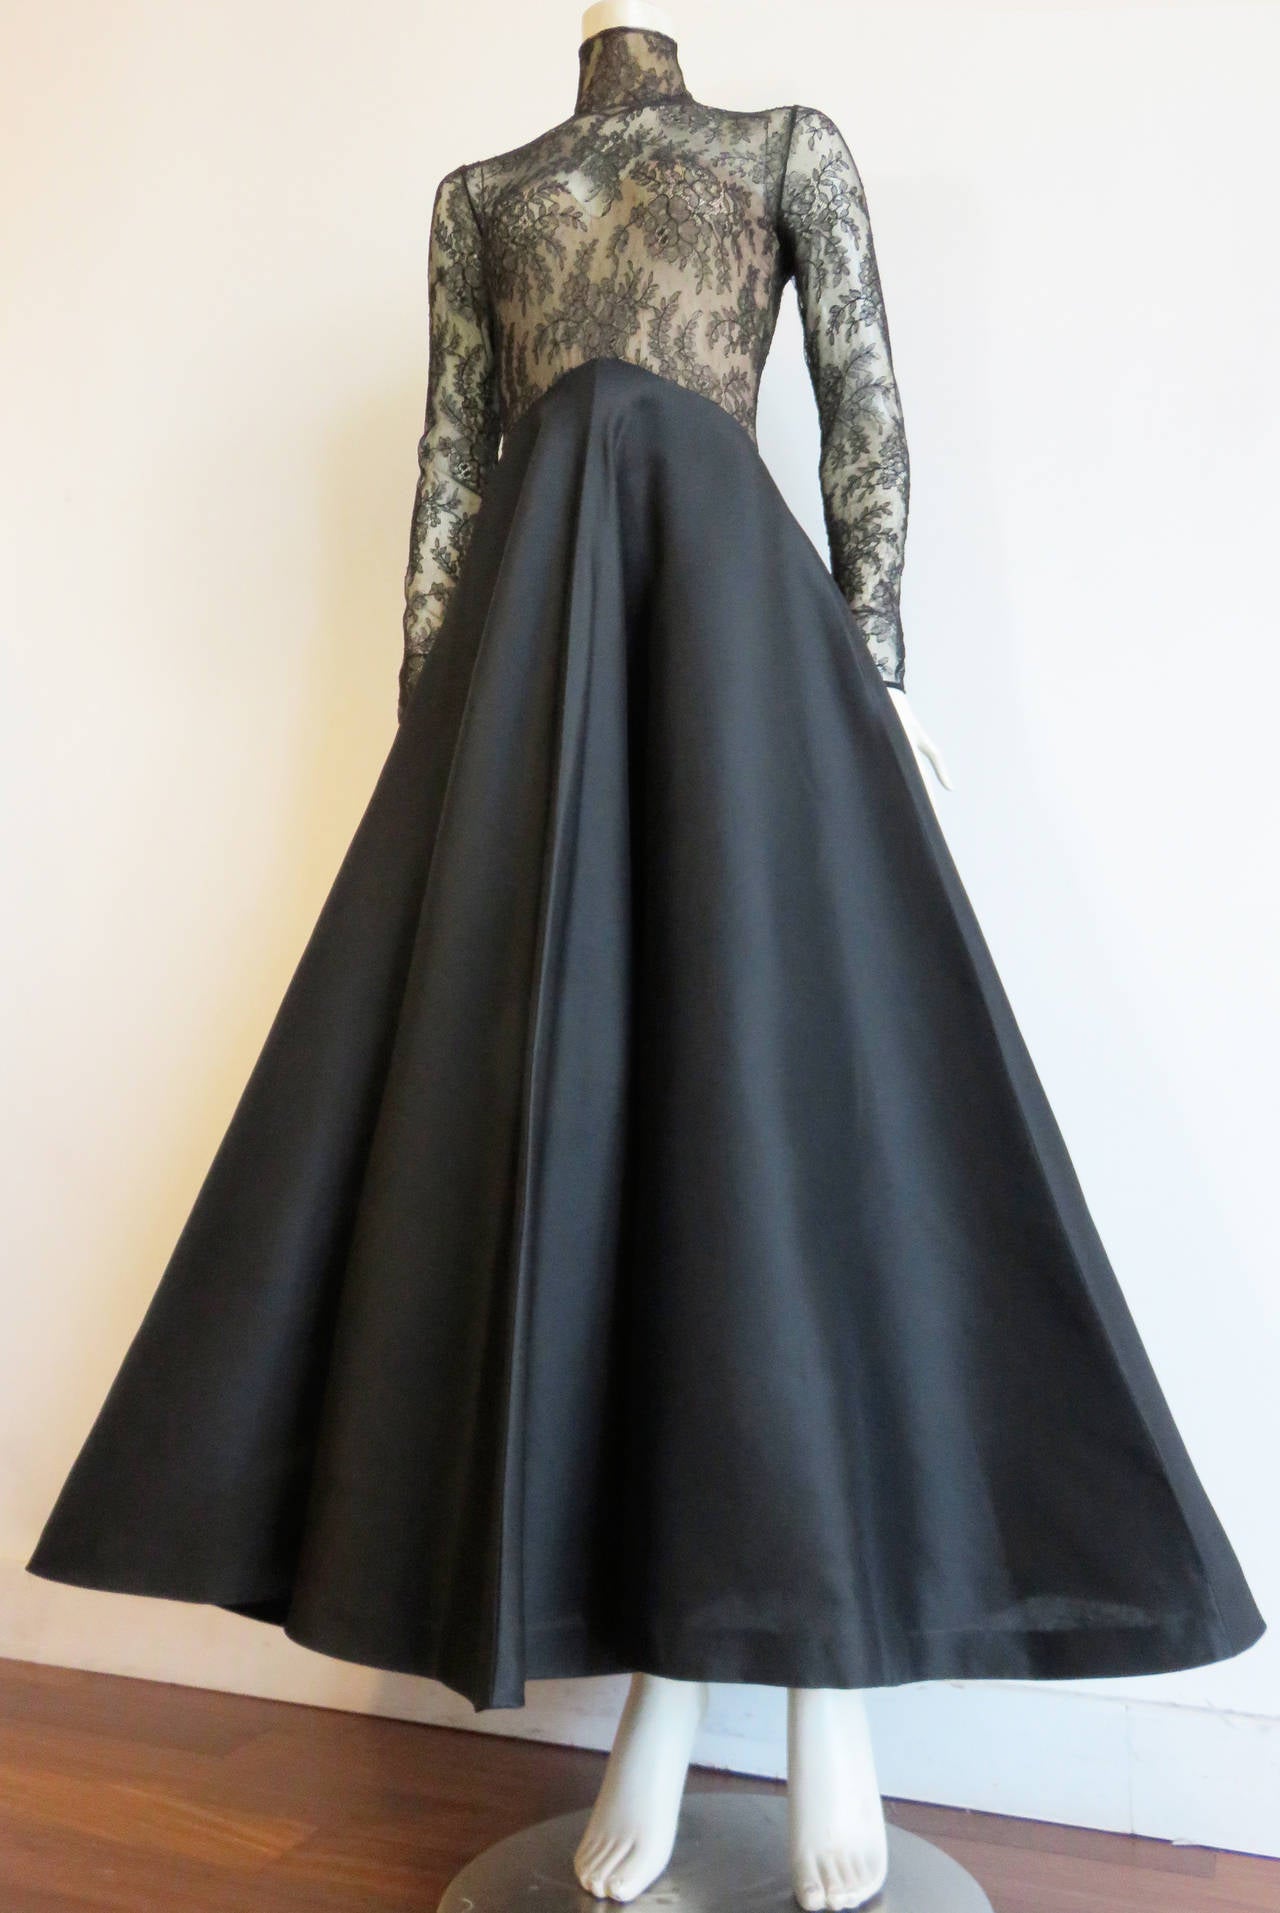 Worn once, 1980's JEAN-LOUIS SCHERRER COUTURE Black, Chantilly lace evening gown dress in beautiful floral pattern design.

This gorgeous evening gown features stretchy, semi-sheer, black lace top bodice with long sleeves.  The mid-torso features